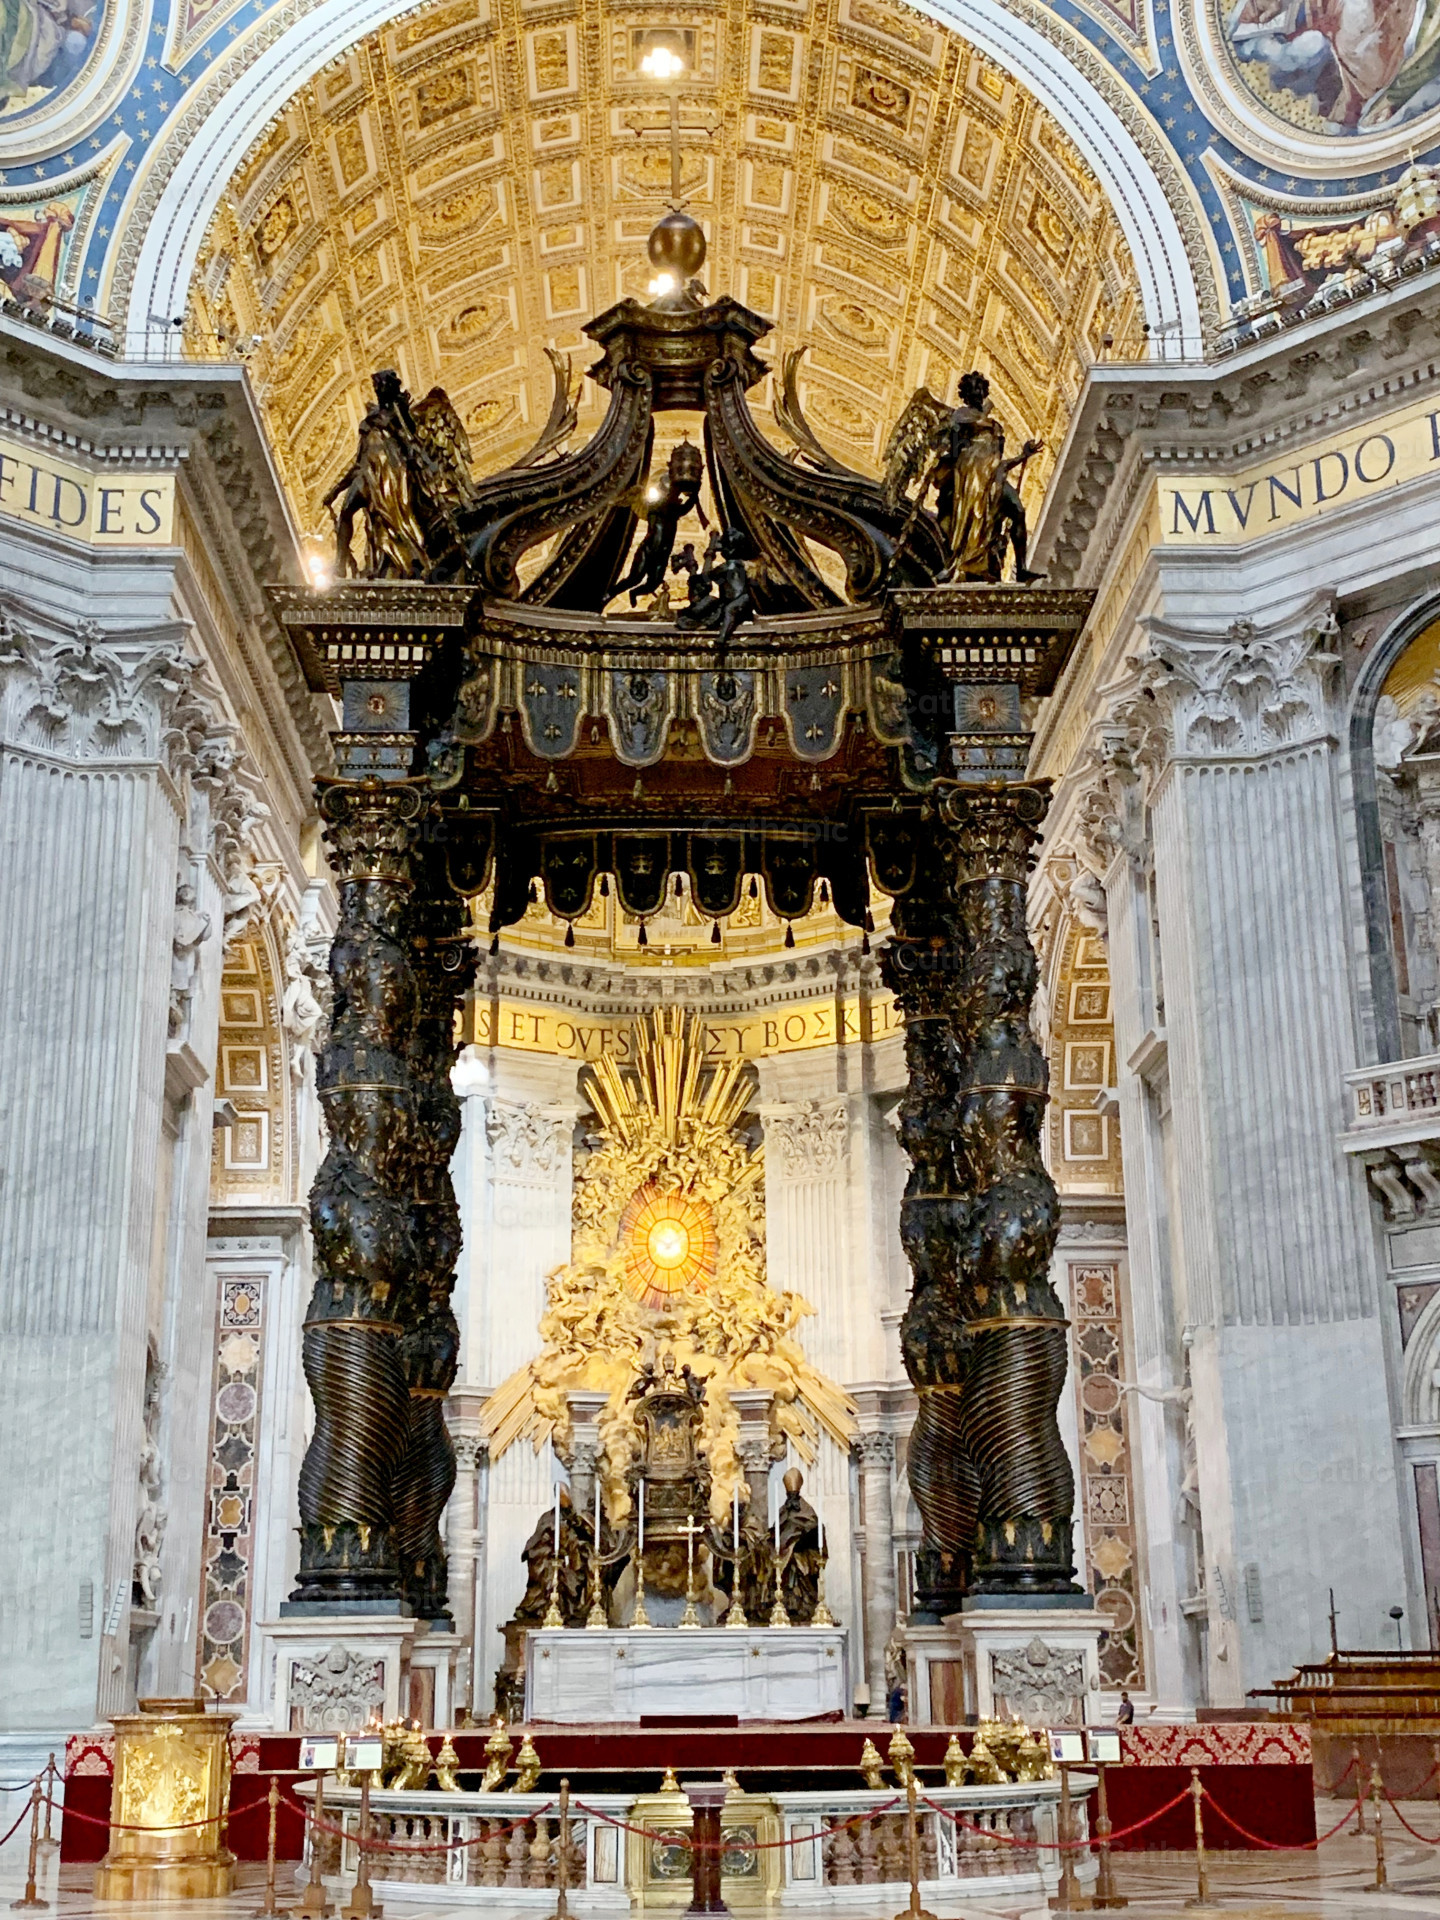 Altar of the Confession in Saint Peter Basilica photo - Cathopic